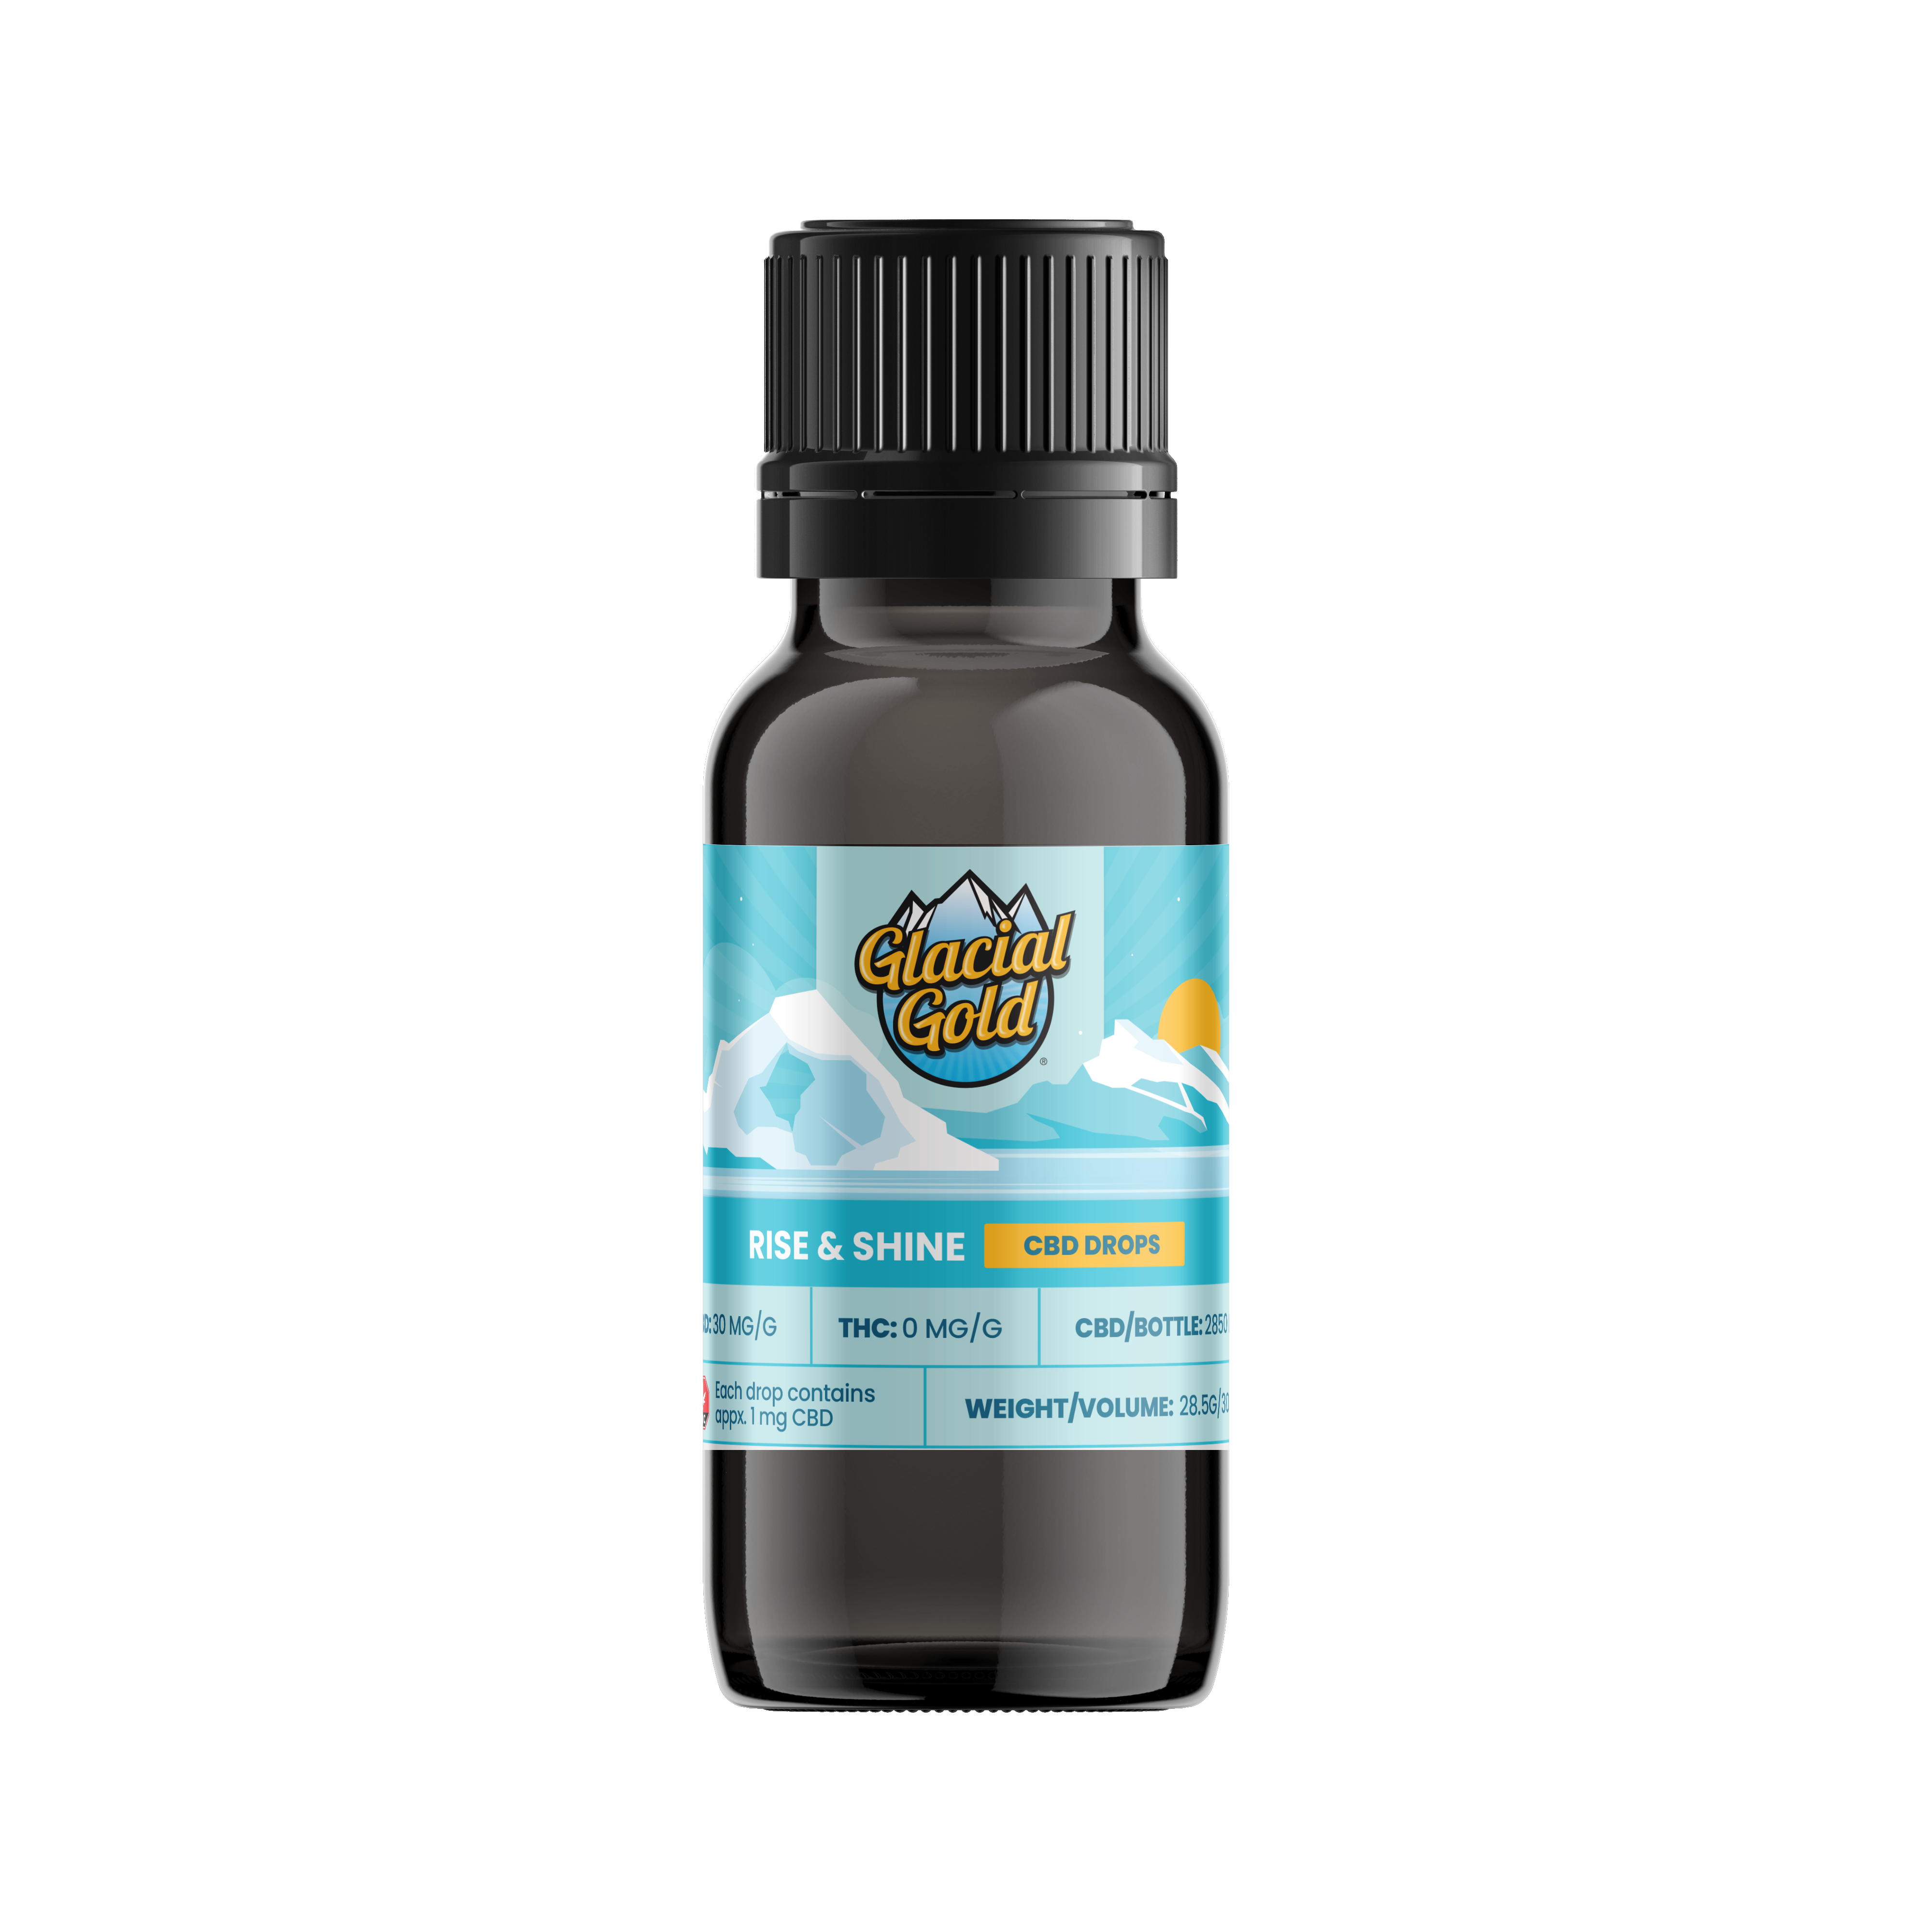 Cannabis Product Rise & Shine CBD drops by Glacial Gold